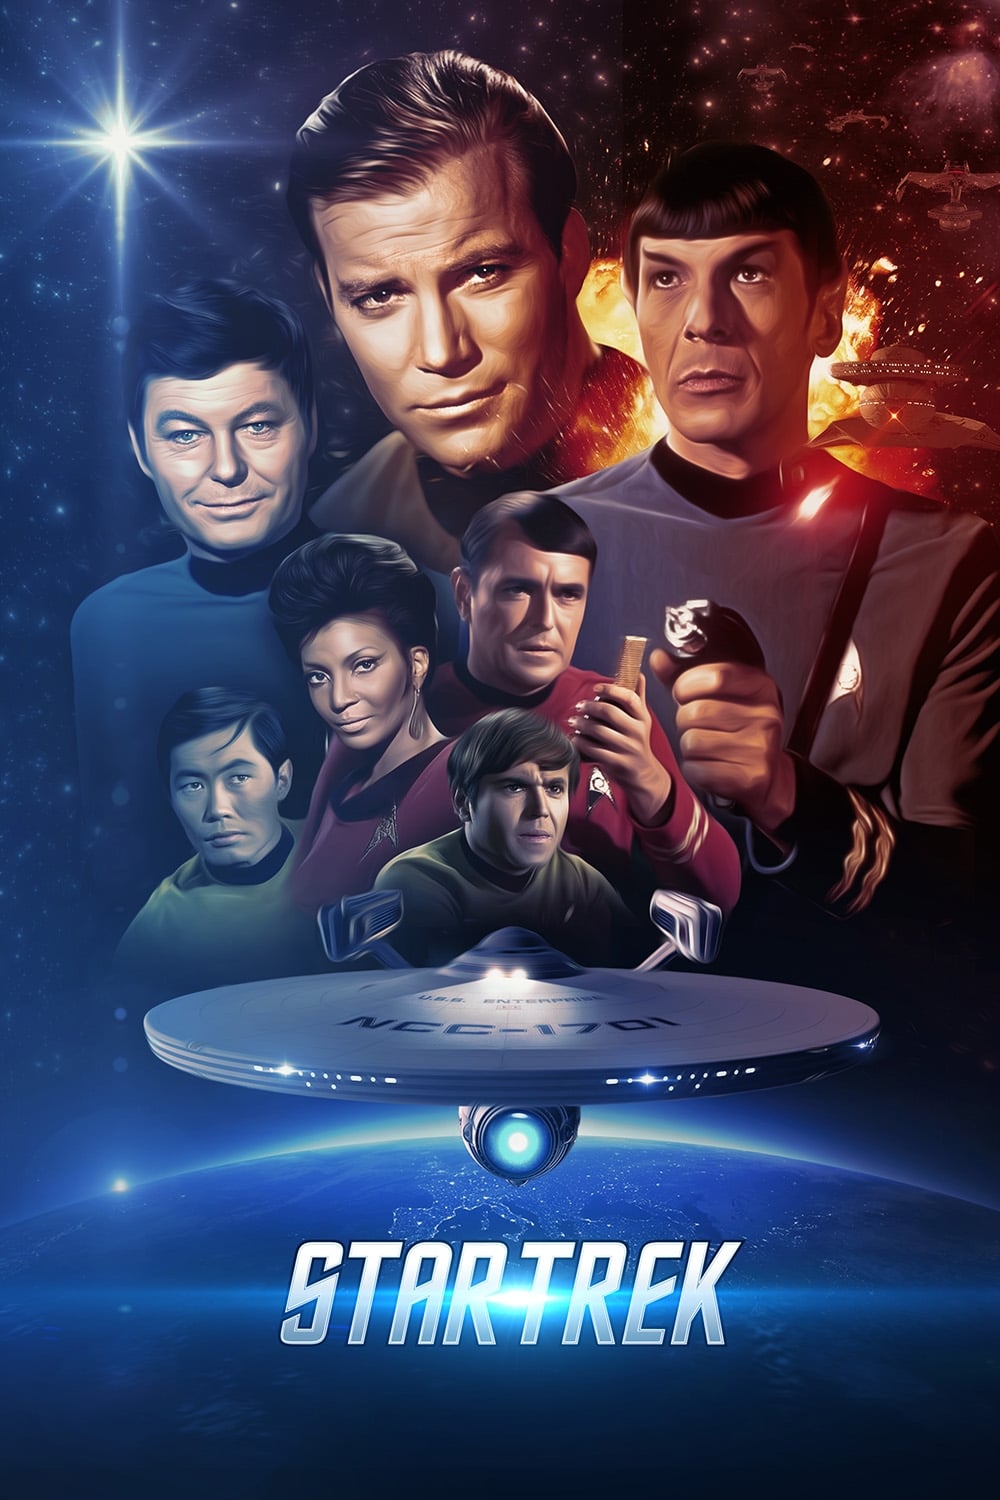 Star Trek TV Shows About Space Opera